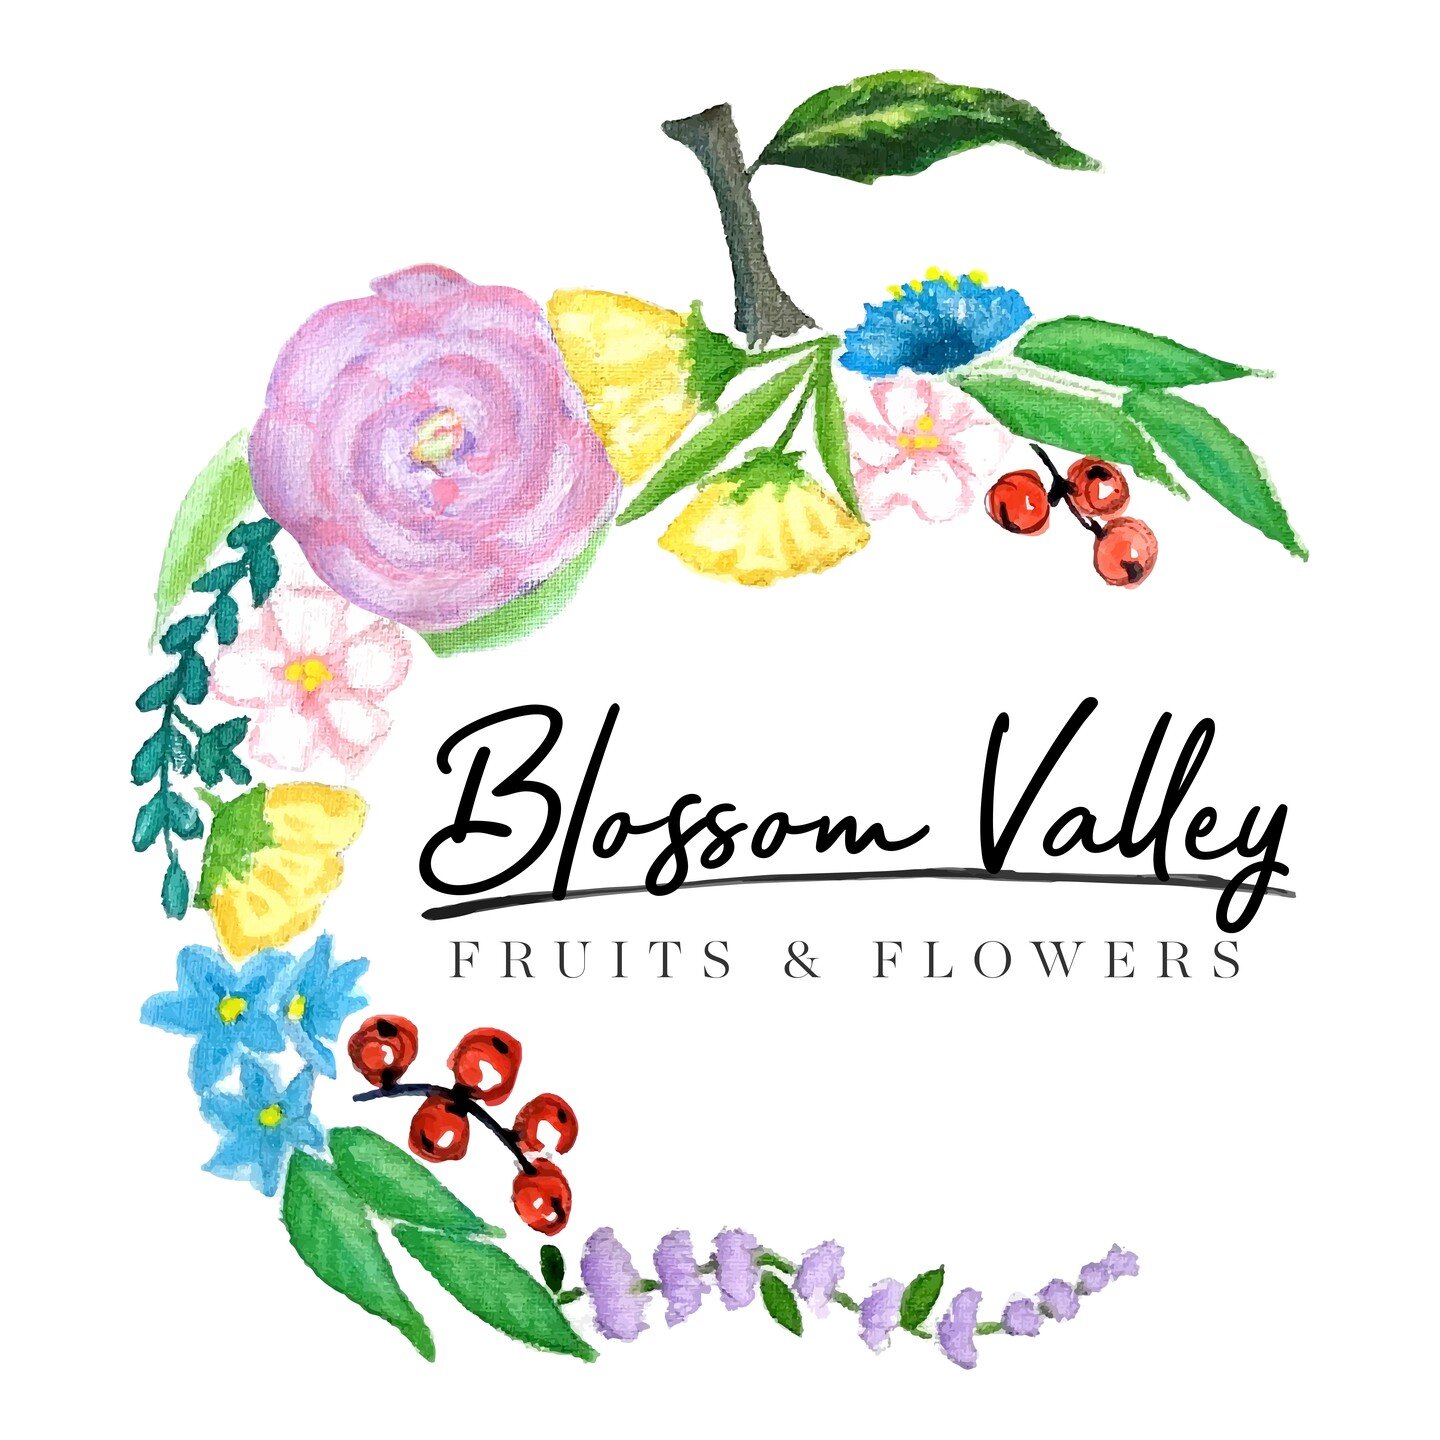 Hey Blossom Valley friends!

We are so excited to launch our updated website and our new footprint for the farm. 

When you get a chance, check it out and hit the &quot;sign up&quot; button and we'll add you to our email list, where you will receive 